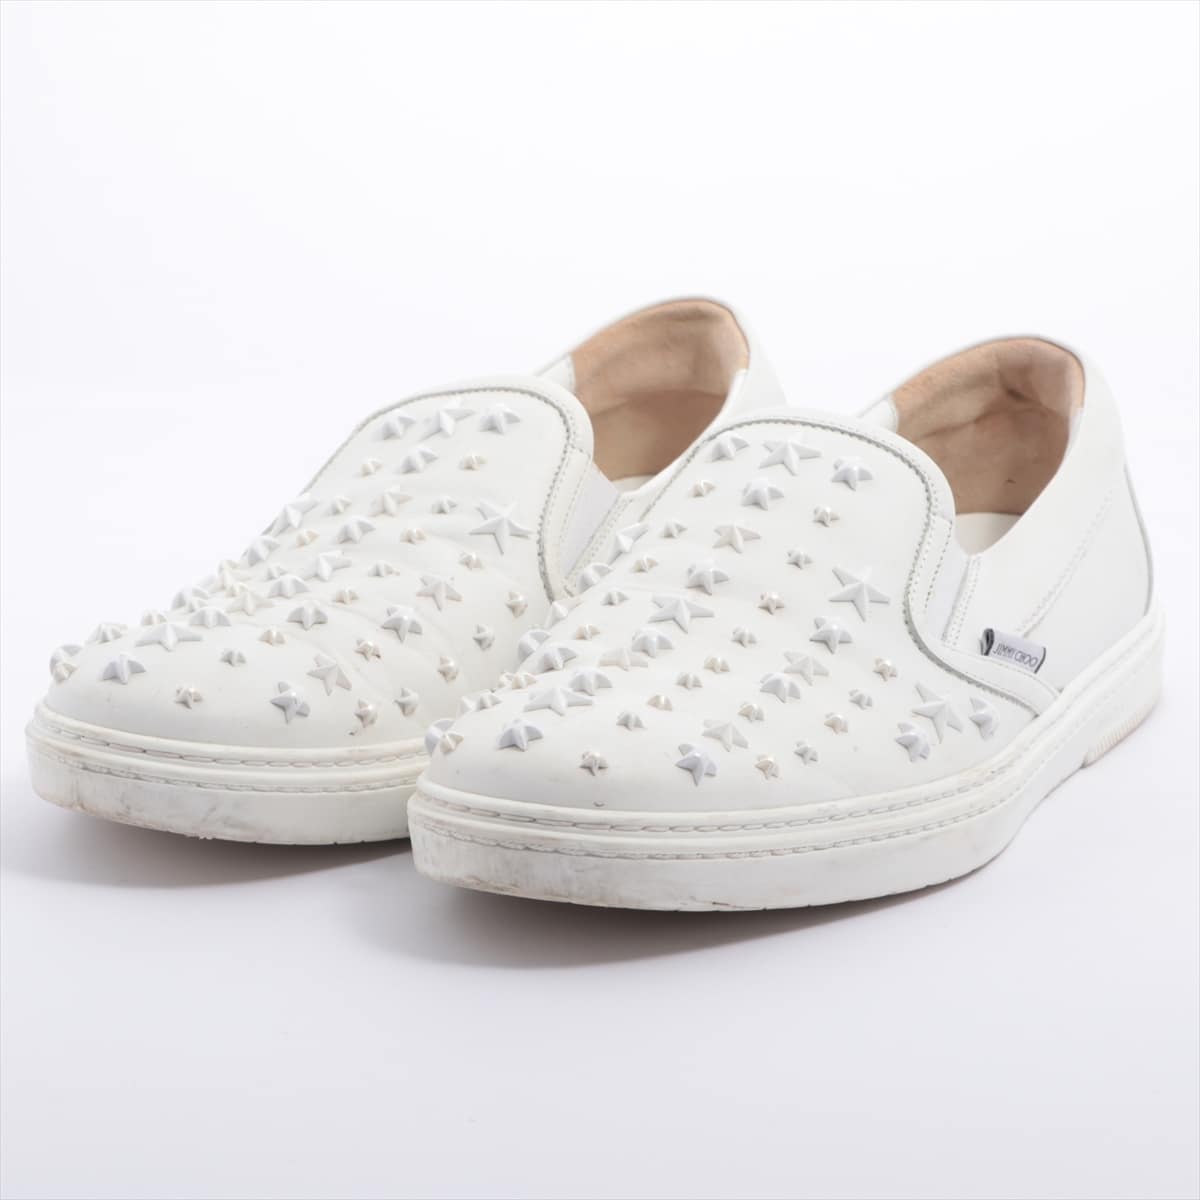 Jimmy Choo Leather Slip-on 43 Men's White Star studs Can I remove the studs